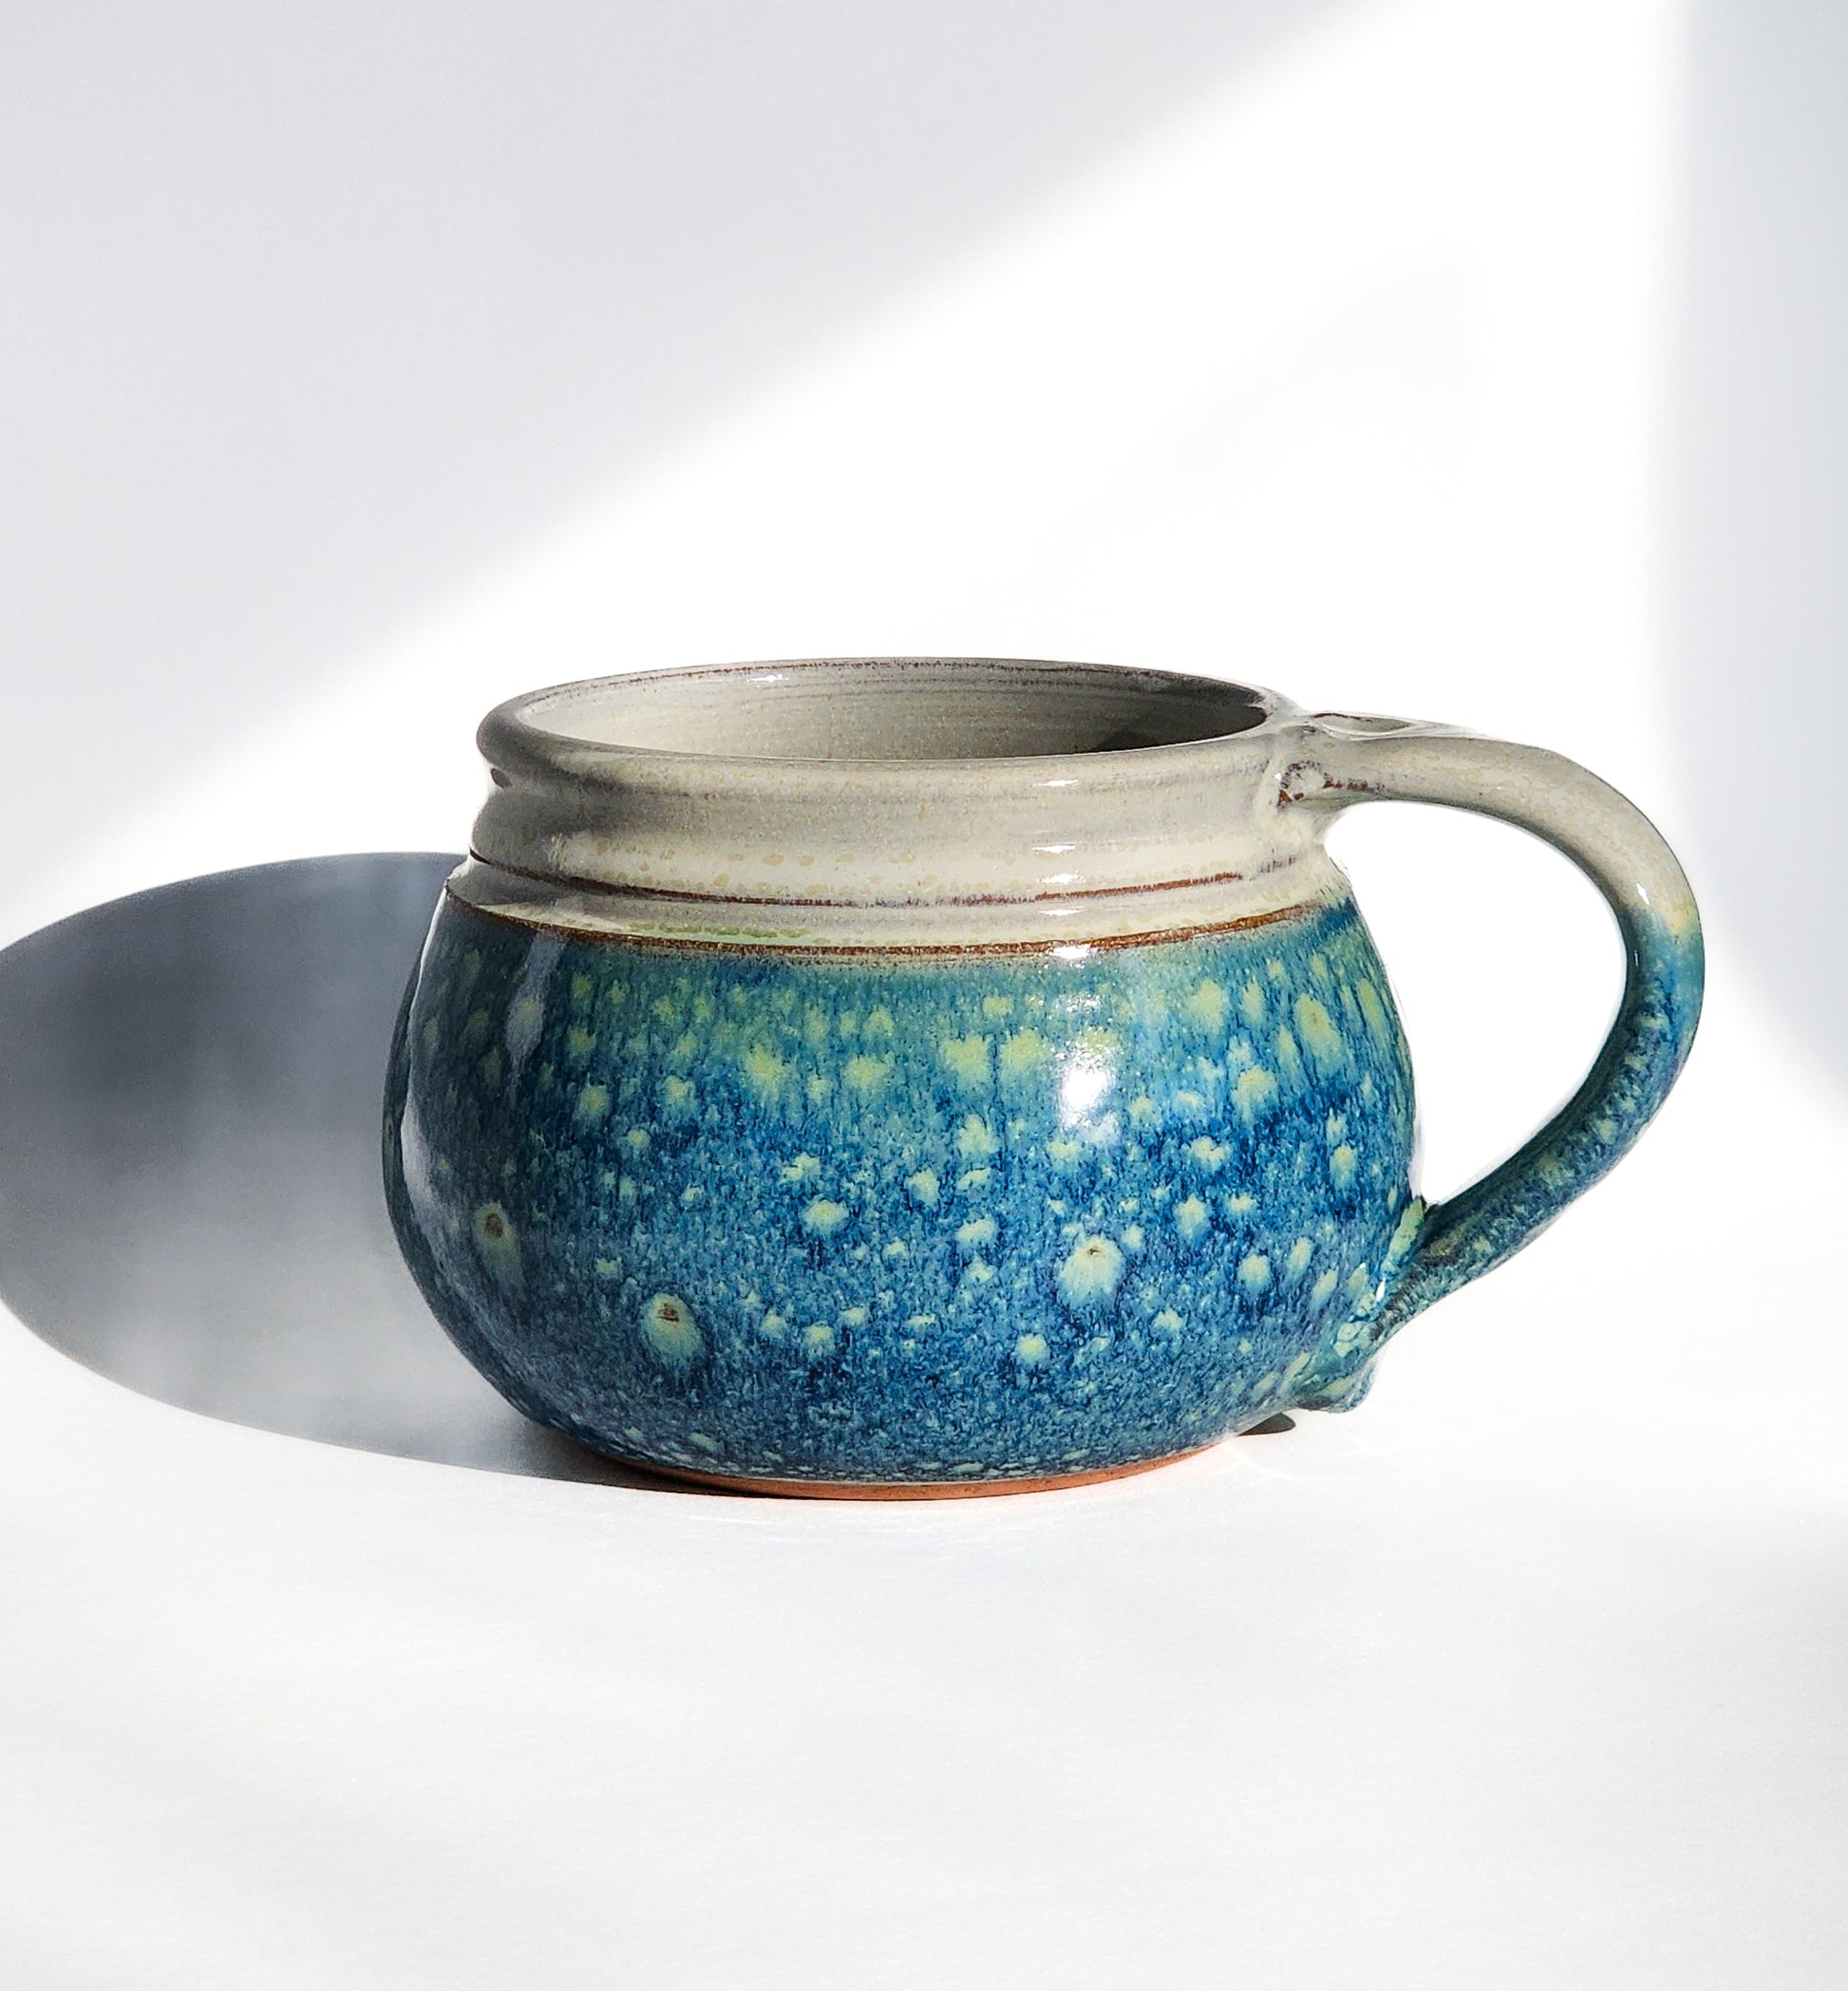 Image: Clinton Pottery's 24 oz Cereal/Soup Mug in Starry Night – A celestial and enchanting addition to your kitchen, this machine washable mug seamlessly blends artistry with functionality. The captivating Starry Night color evokes the magic of the night sky, reminiscent of Van Gogh's swirling stars and cosmic wonder. Perfect for enjoying your favorite cereal or soup with a touch of celestial elegance.